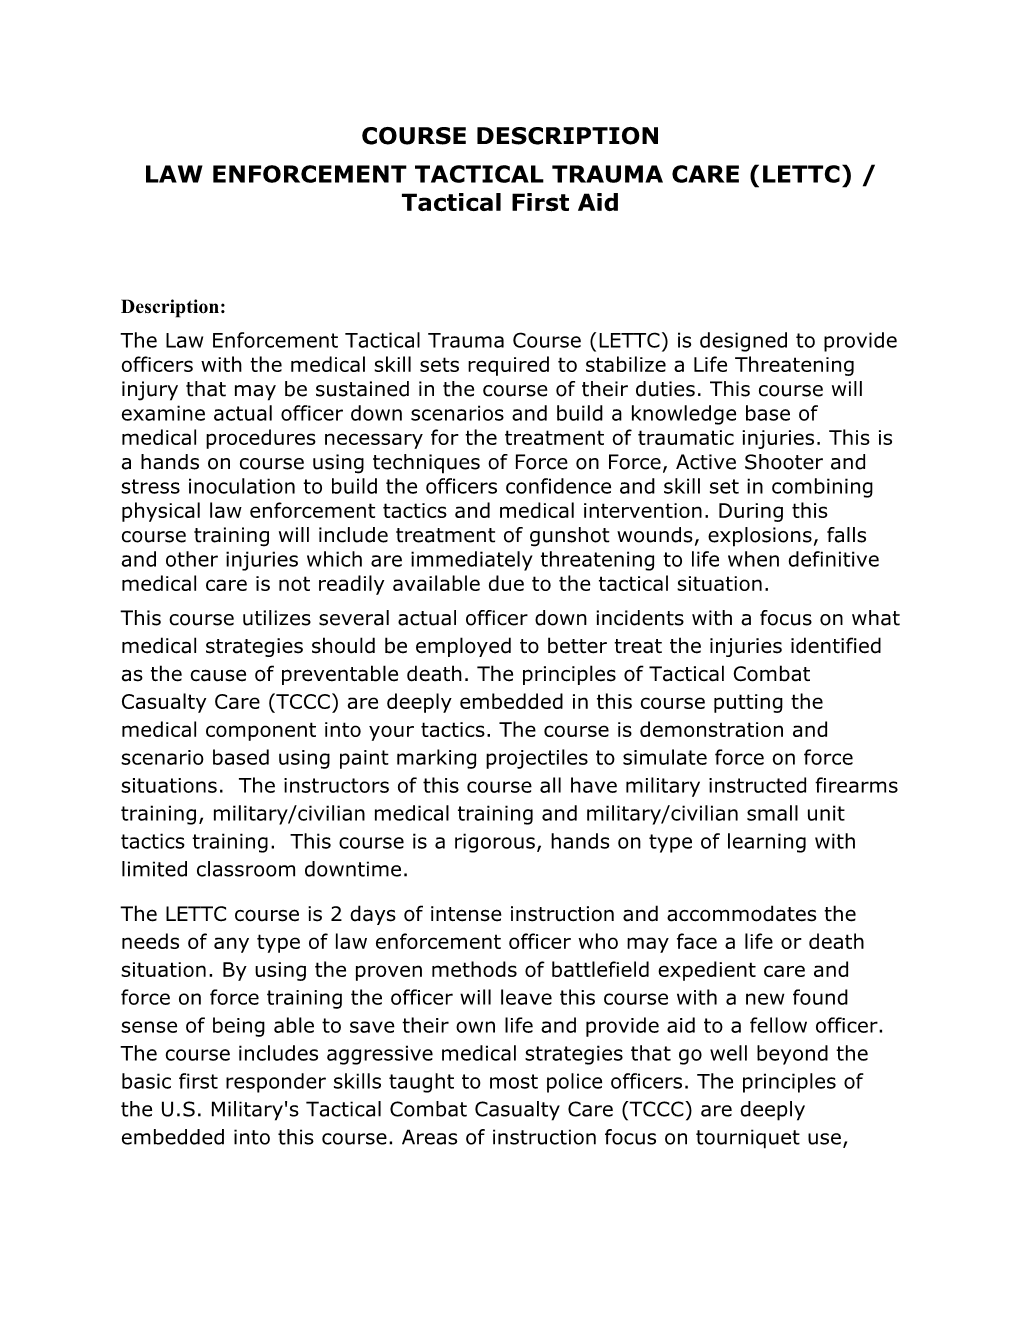 LAW ENFORCEMENT TACTICAL TRAUMA CARE (LETTC) / Tactical First Aid